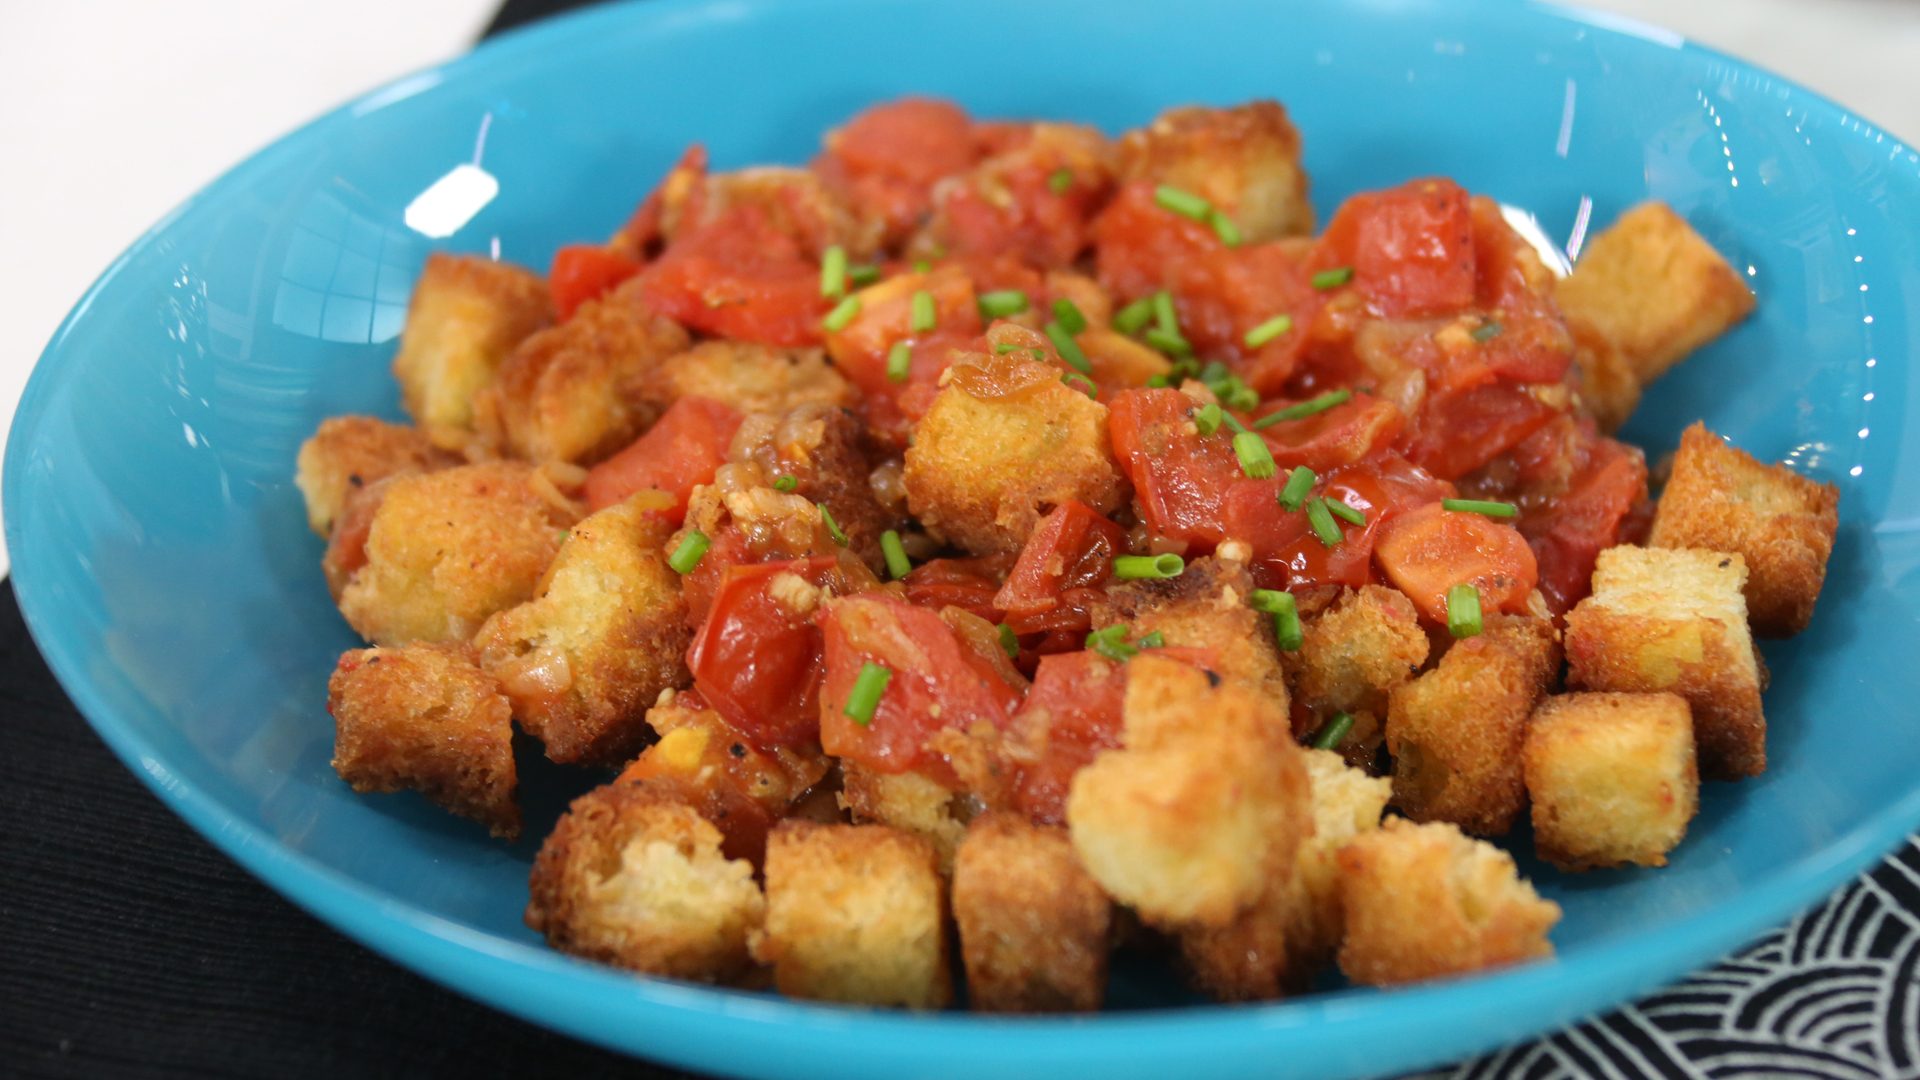 Tomato and fried bread hash